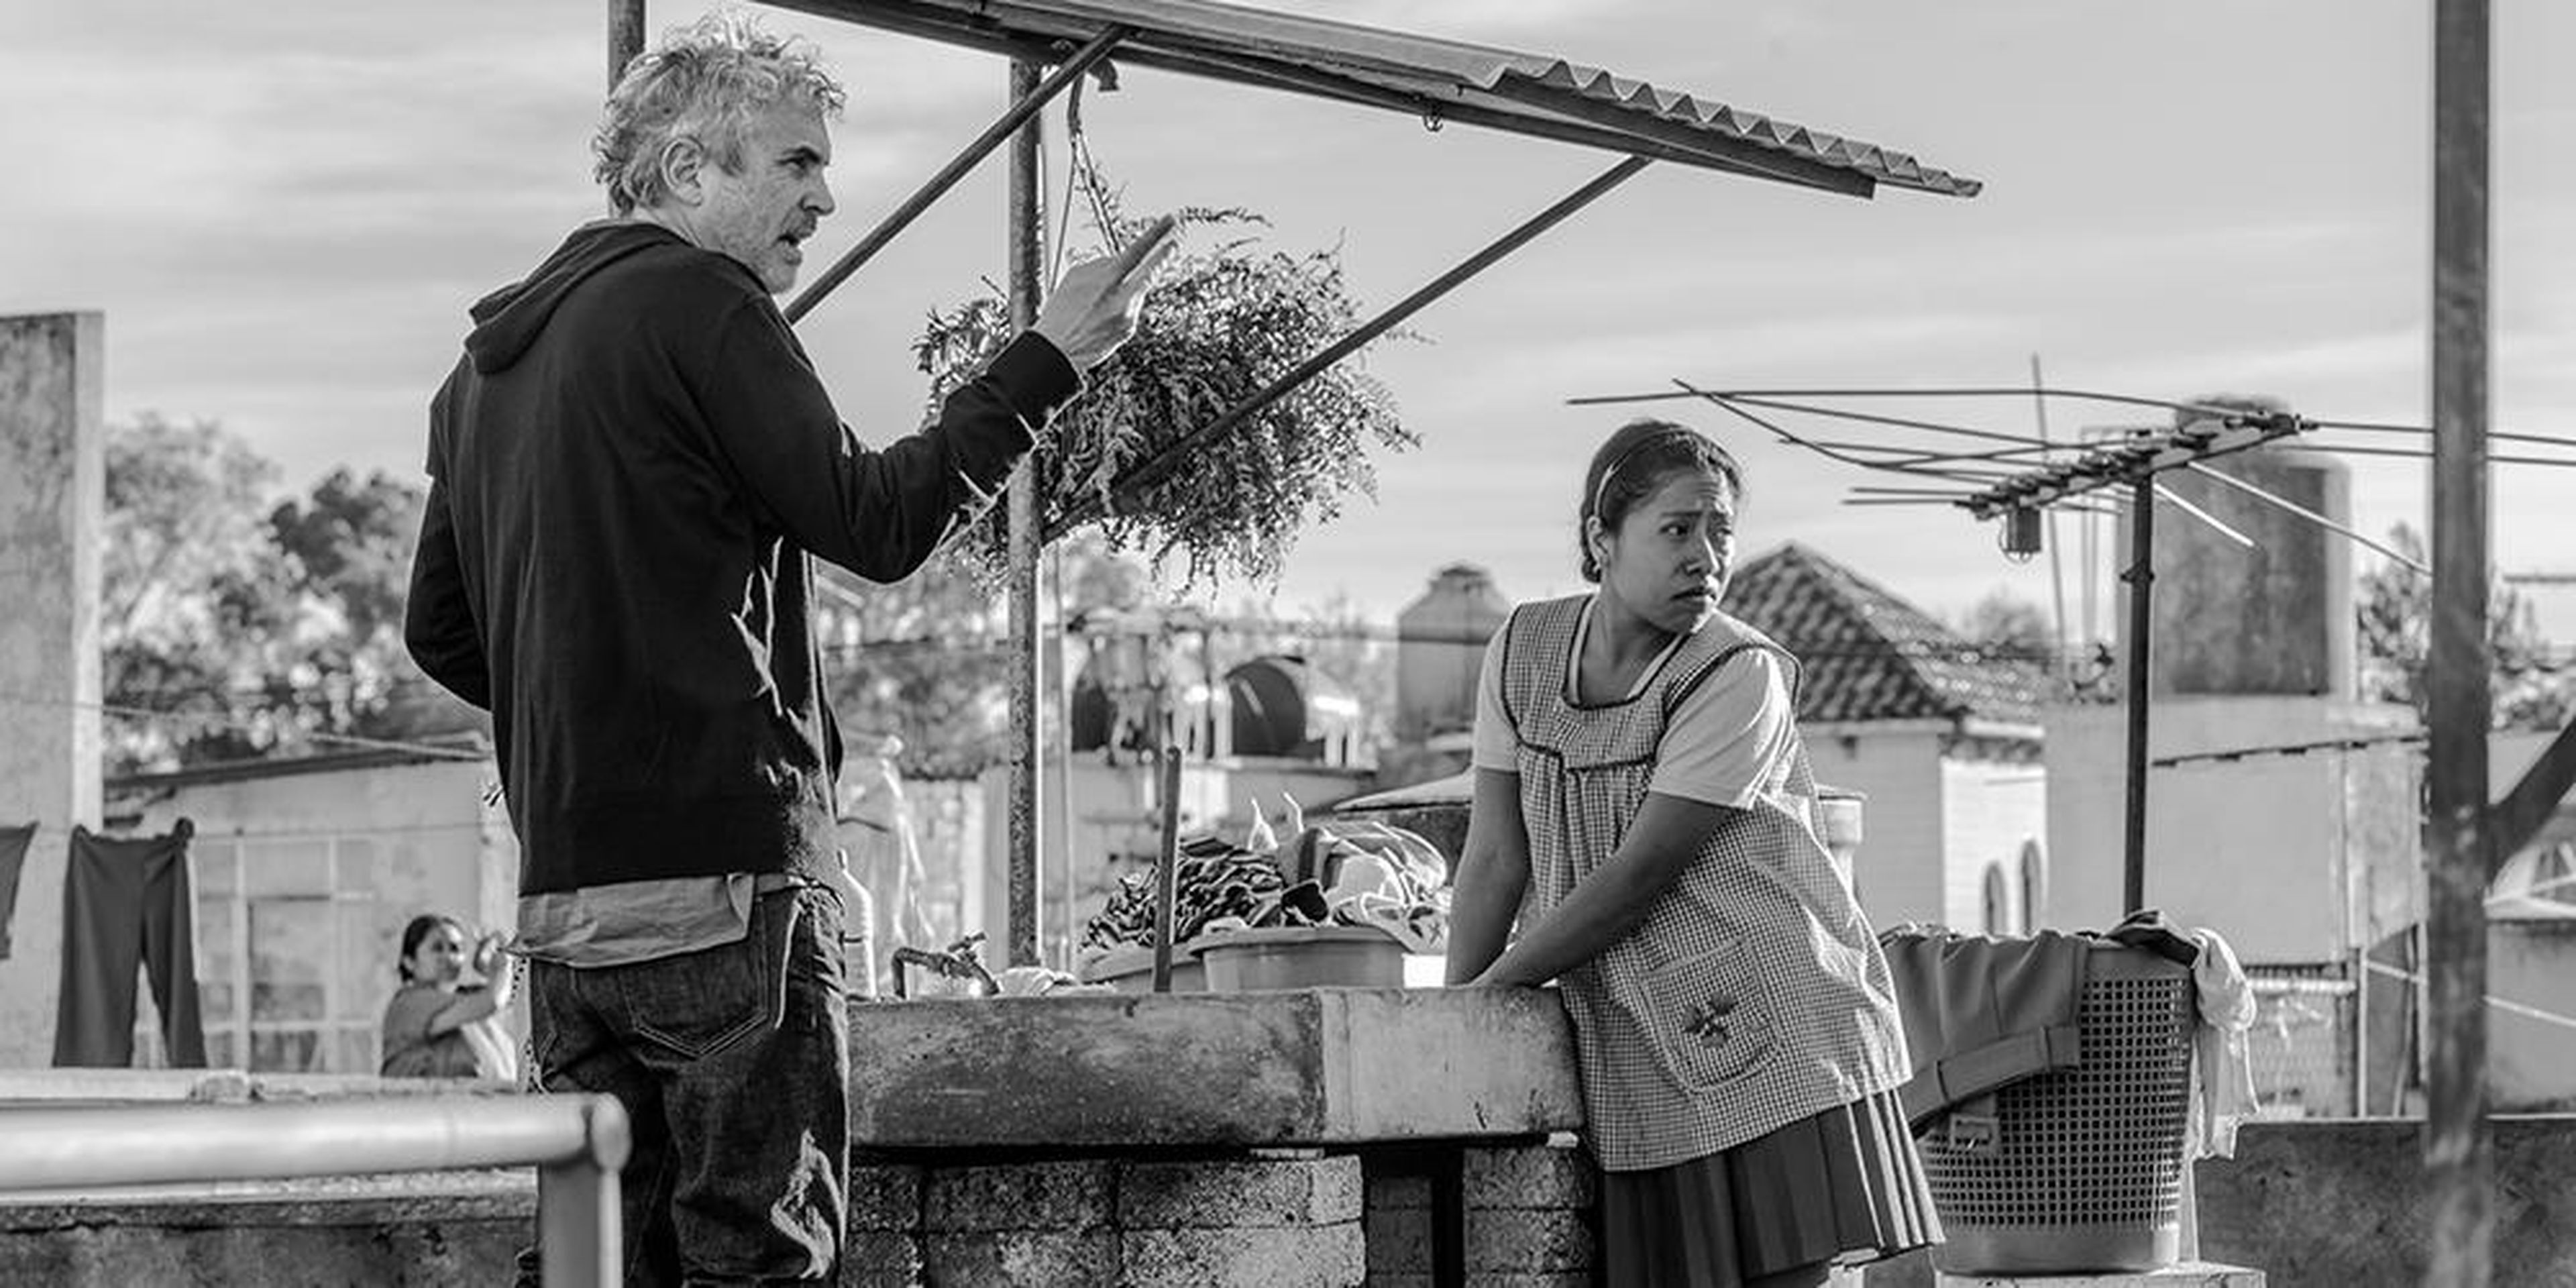 Alfonso Cuarón on the set of "Roma."